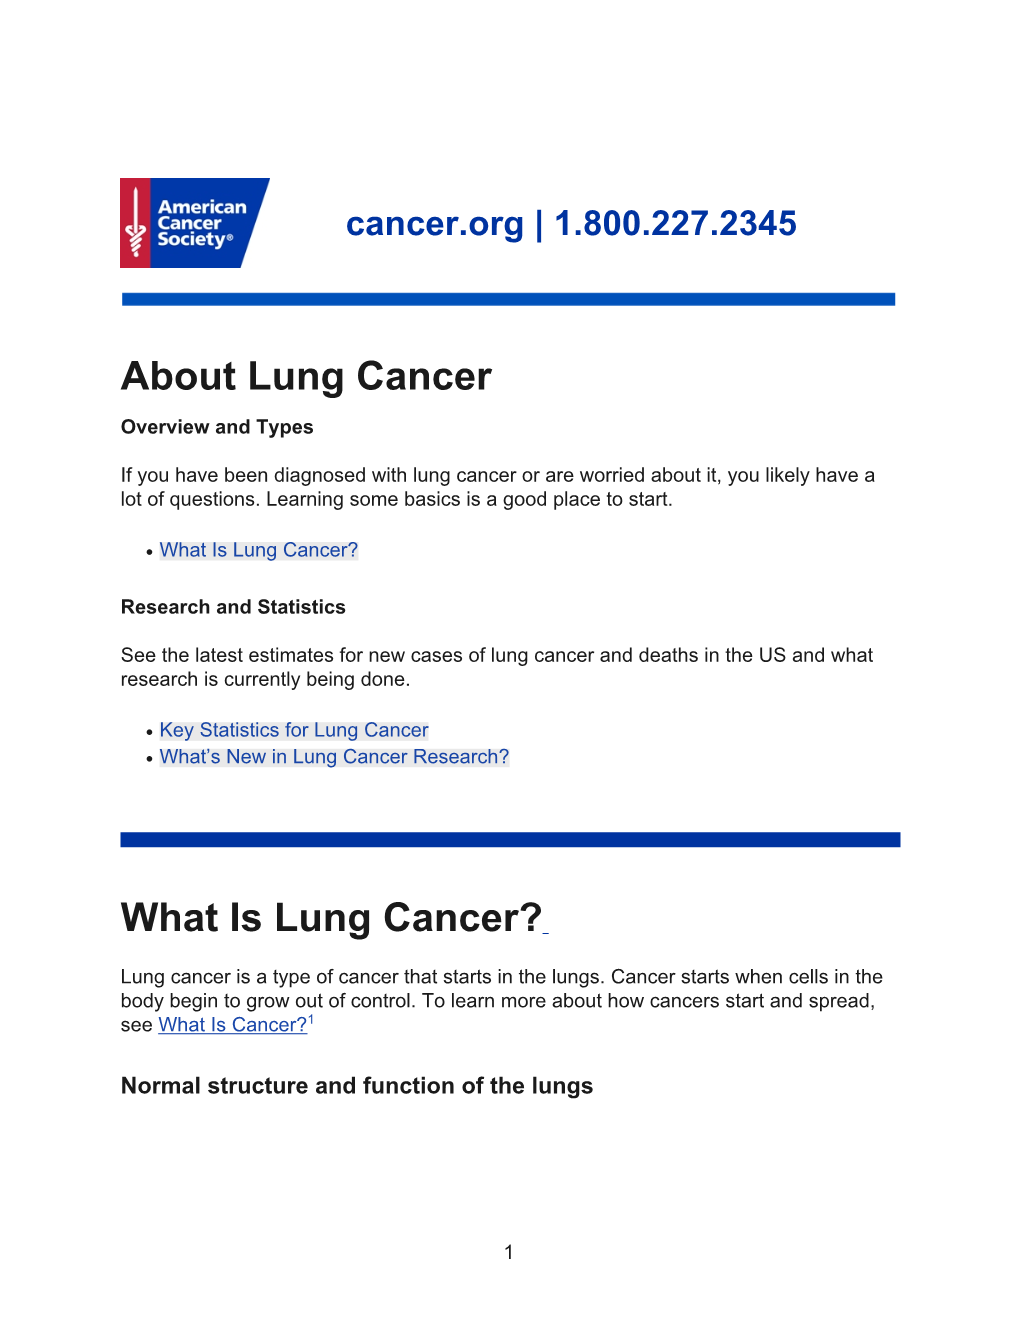 About Lung Cancer What Is Lung Cancer?